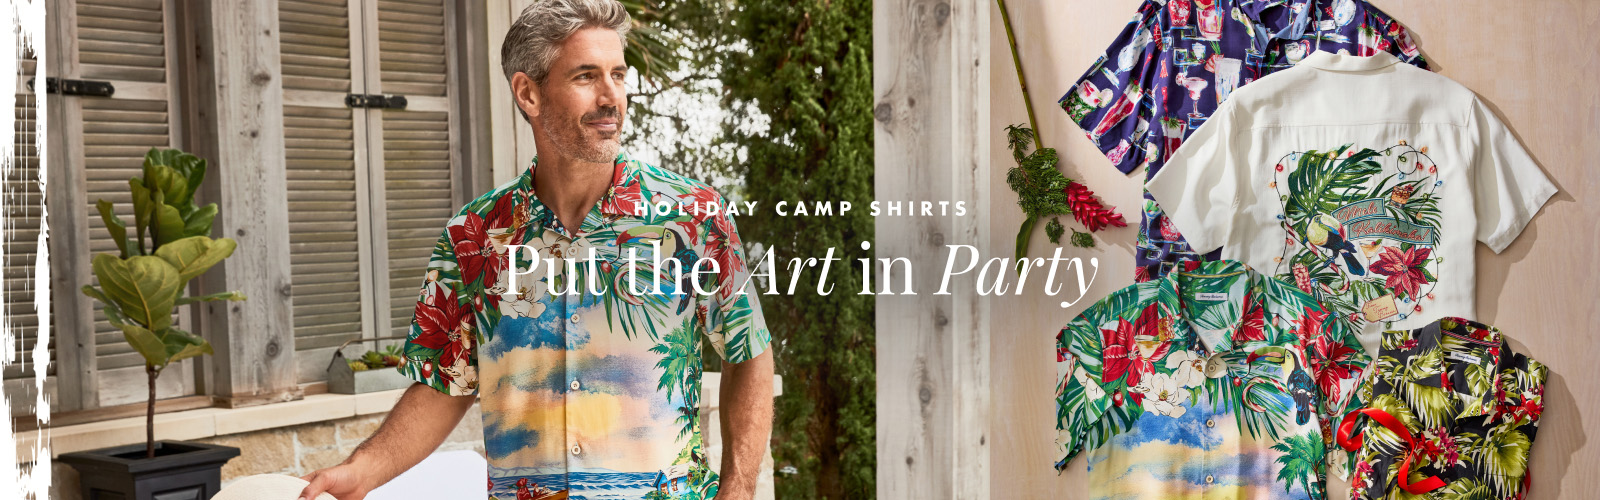 Holiday Camp Shirts - Put the Art in Party